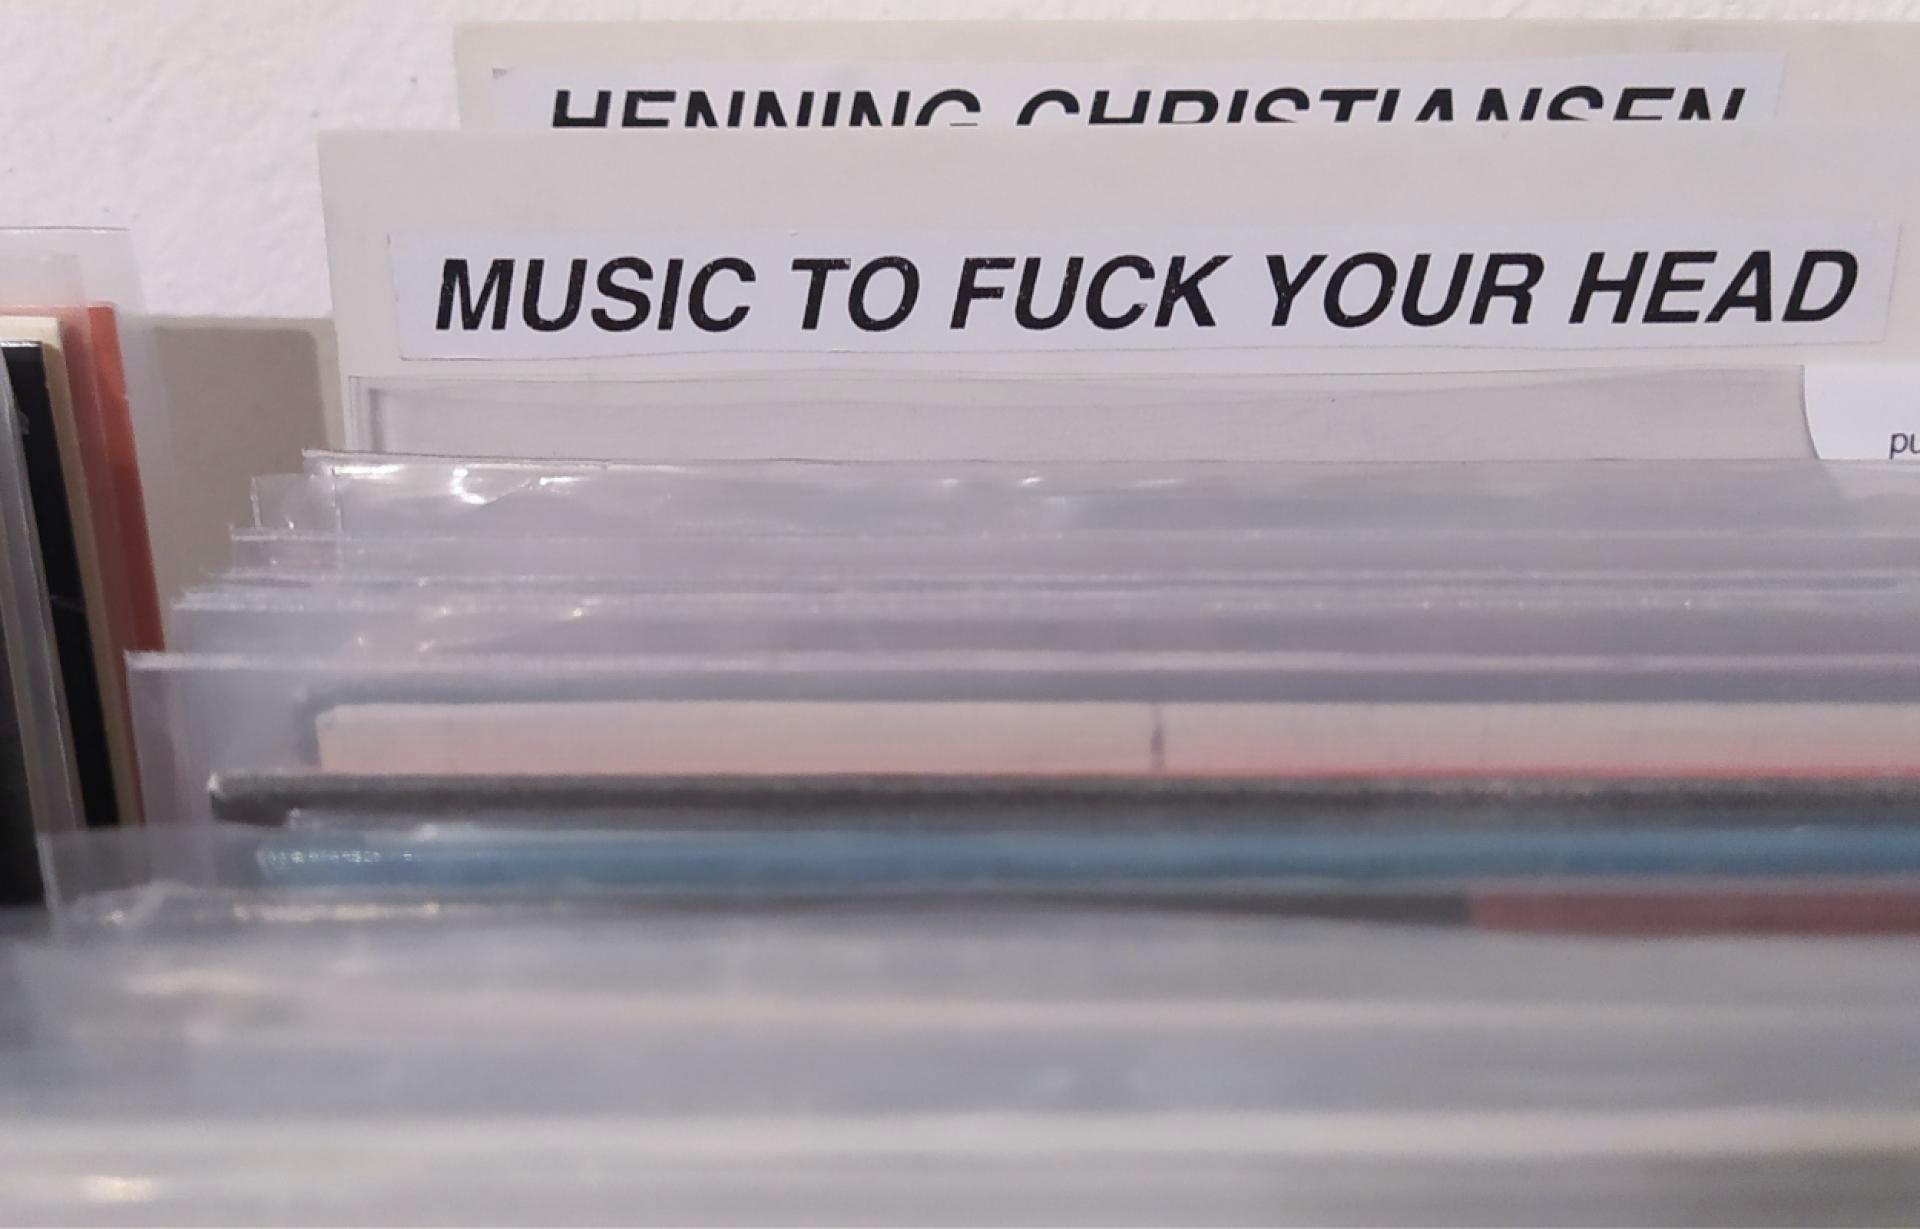 A section in a record stores that says "music to fuck your head"